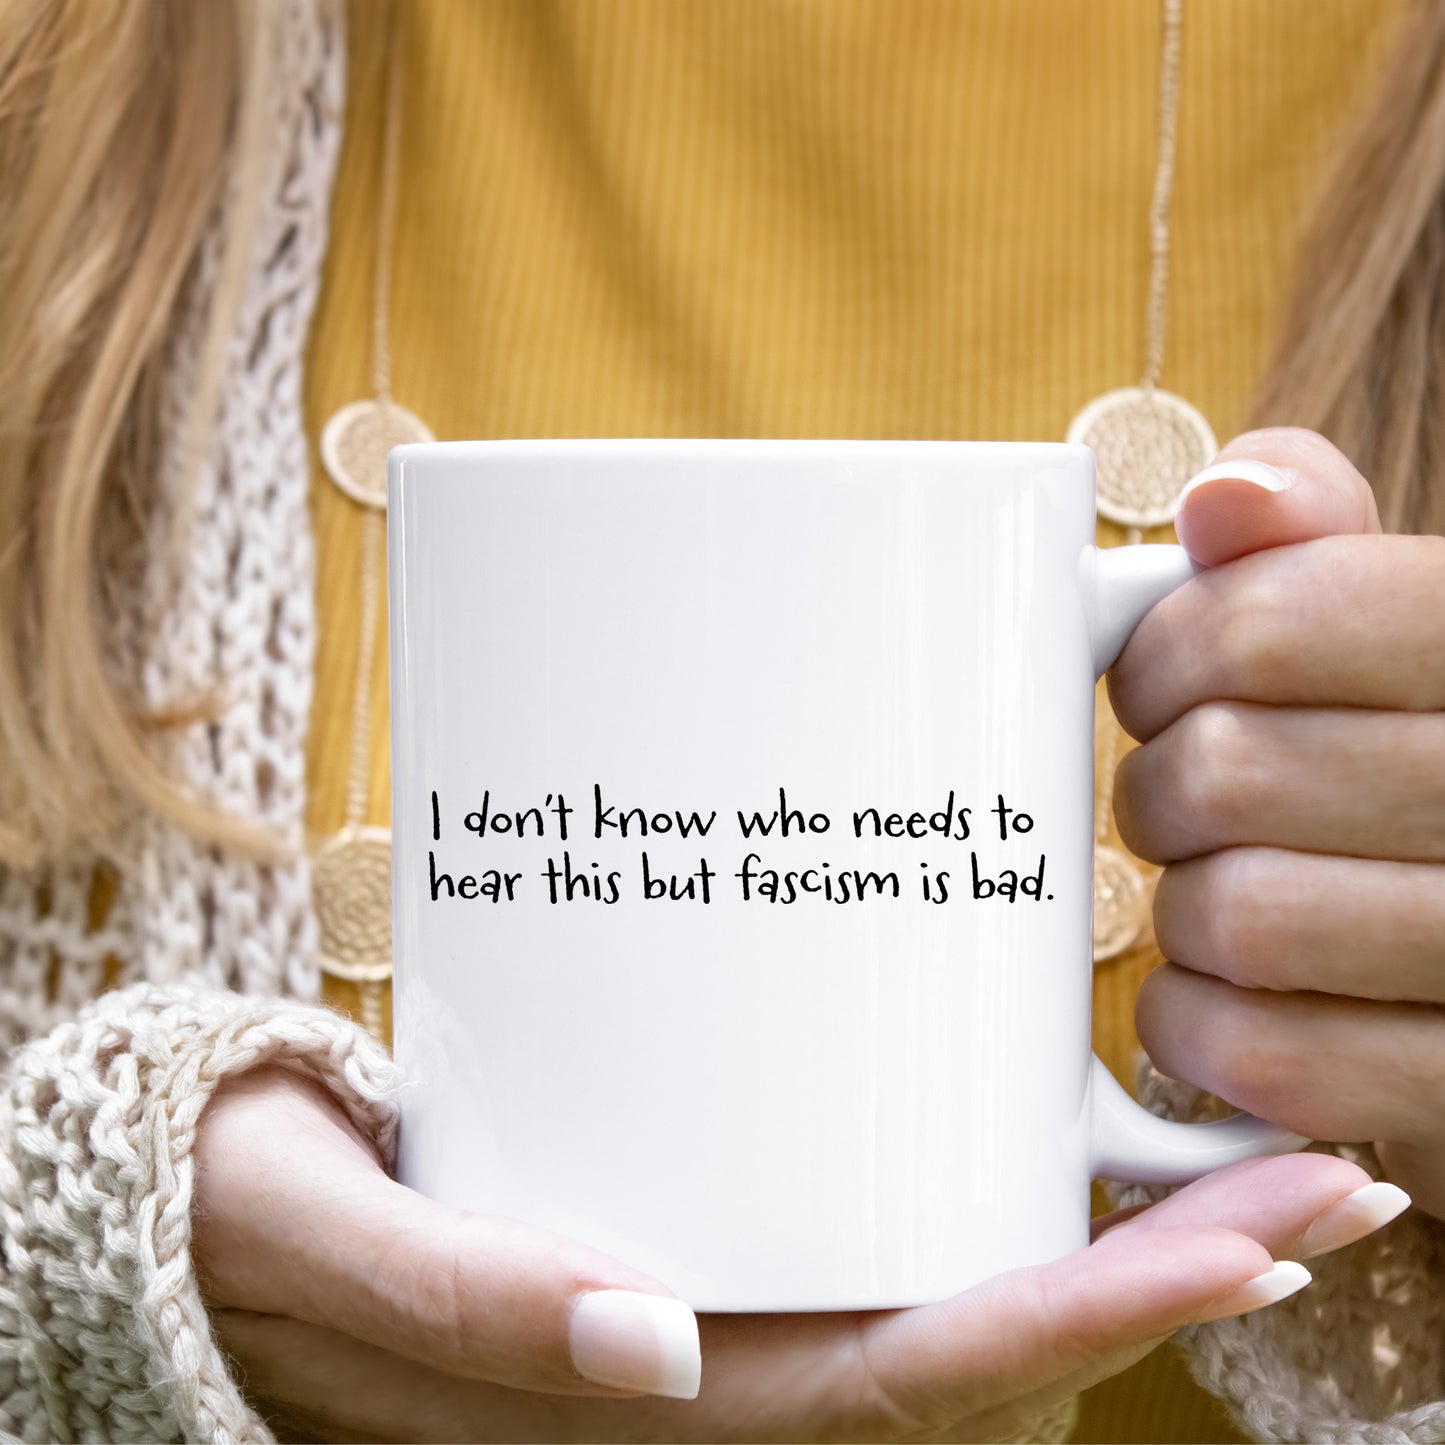 A woman holding a white ceramic mug with the handle facing the right that reads "I don't know who needs to hear this but fascism is bad." The text is written in a handwritten font.